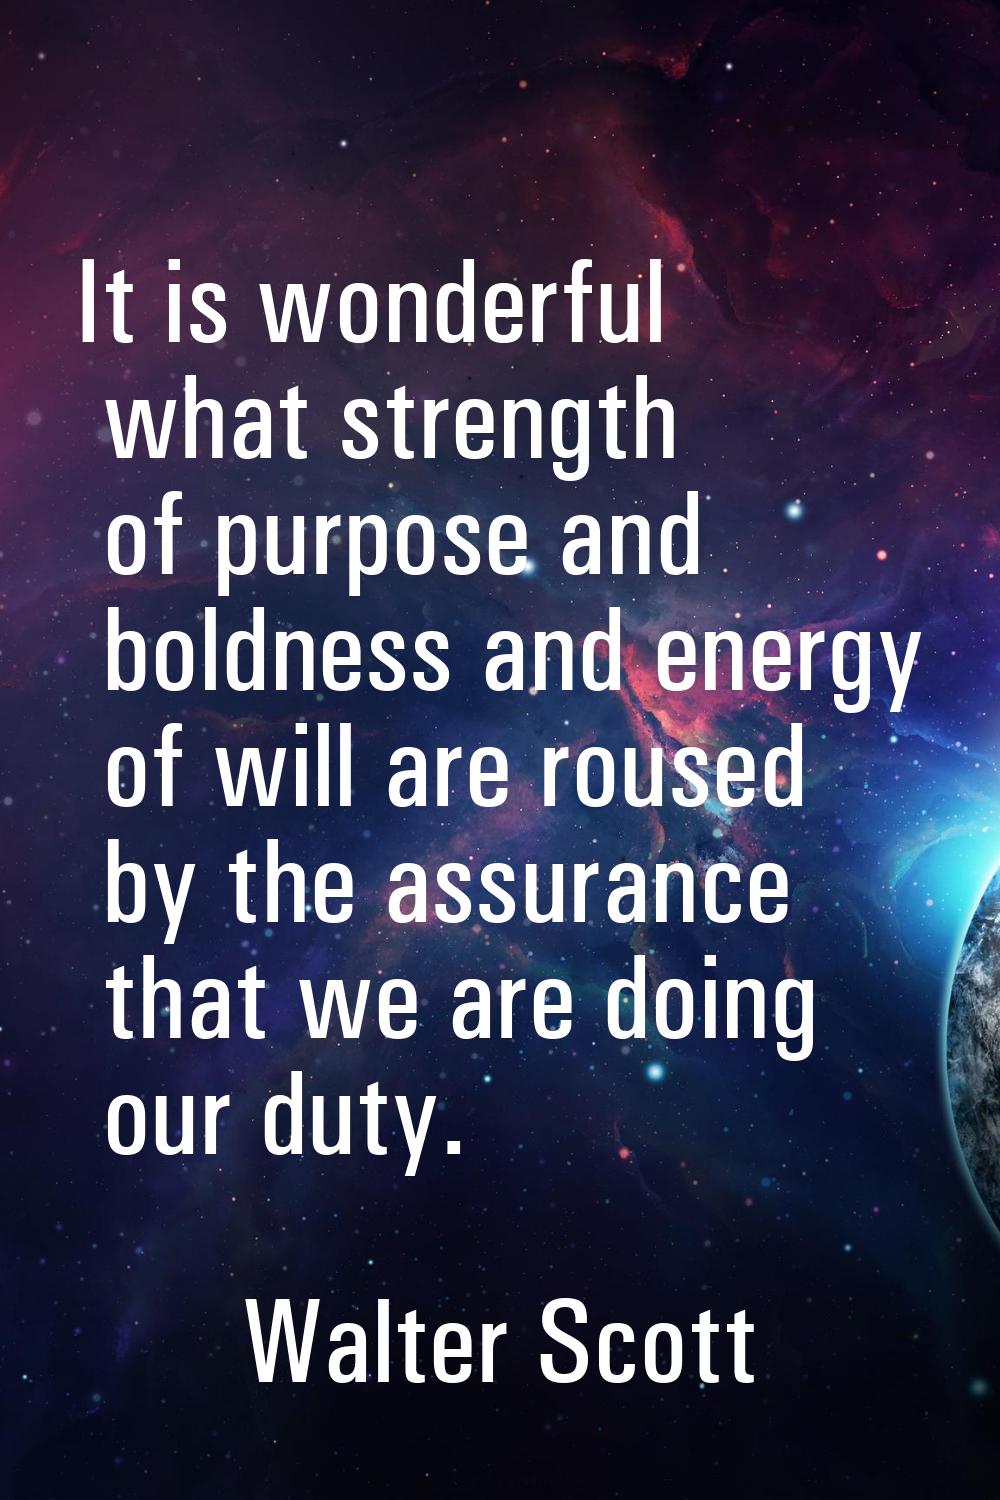 It is wonderful what strength of purpose and boldness and energy of will are roused by the assuranc